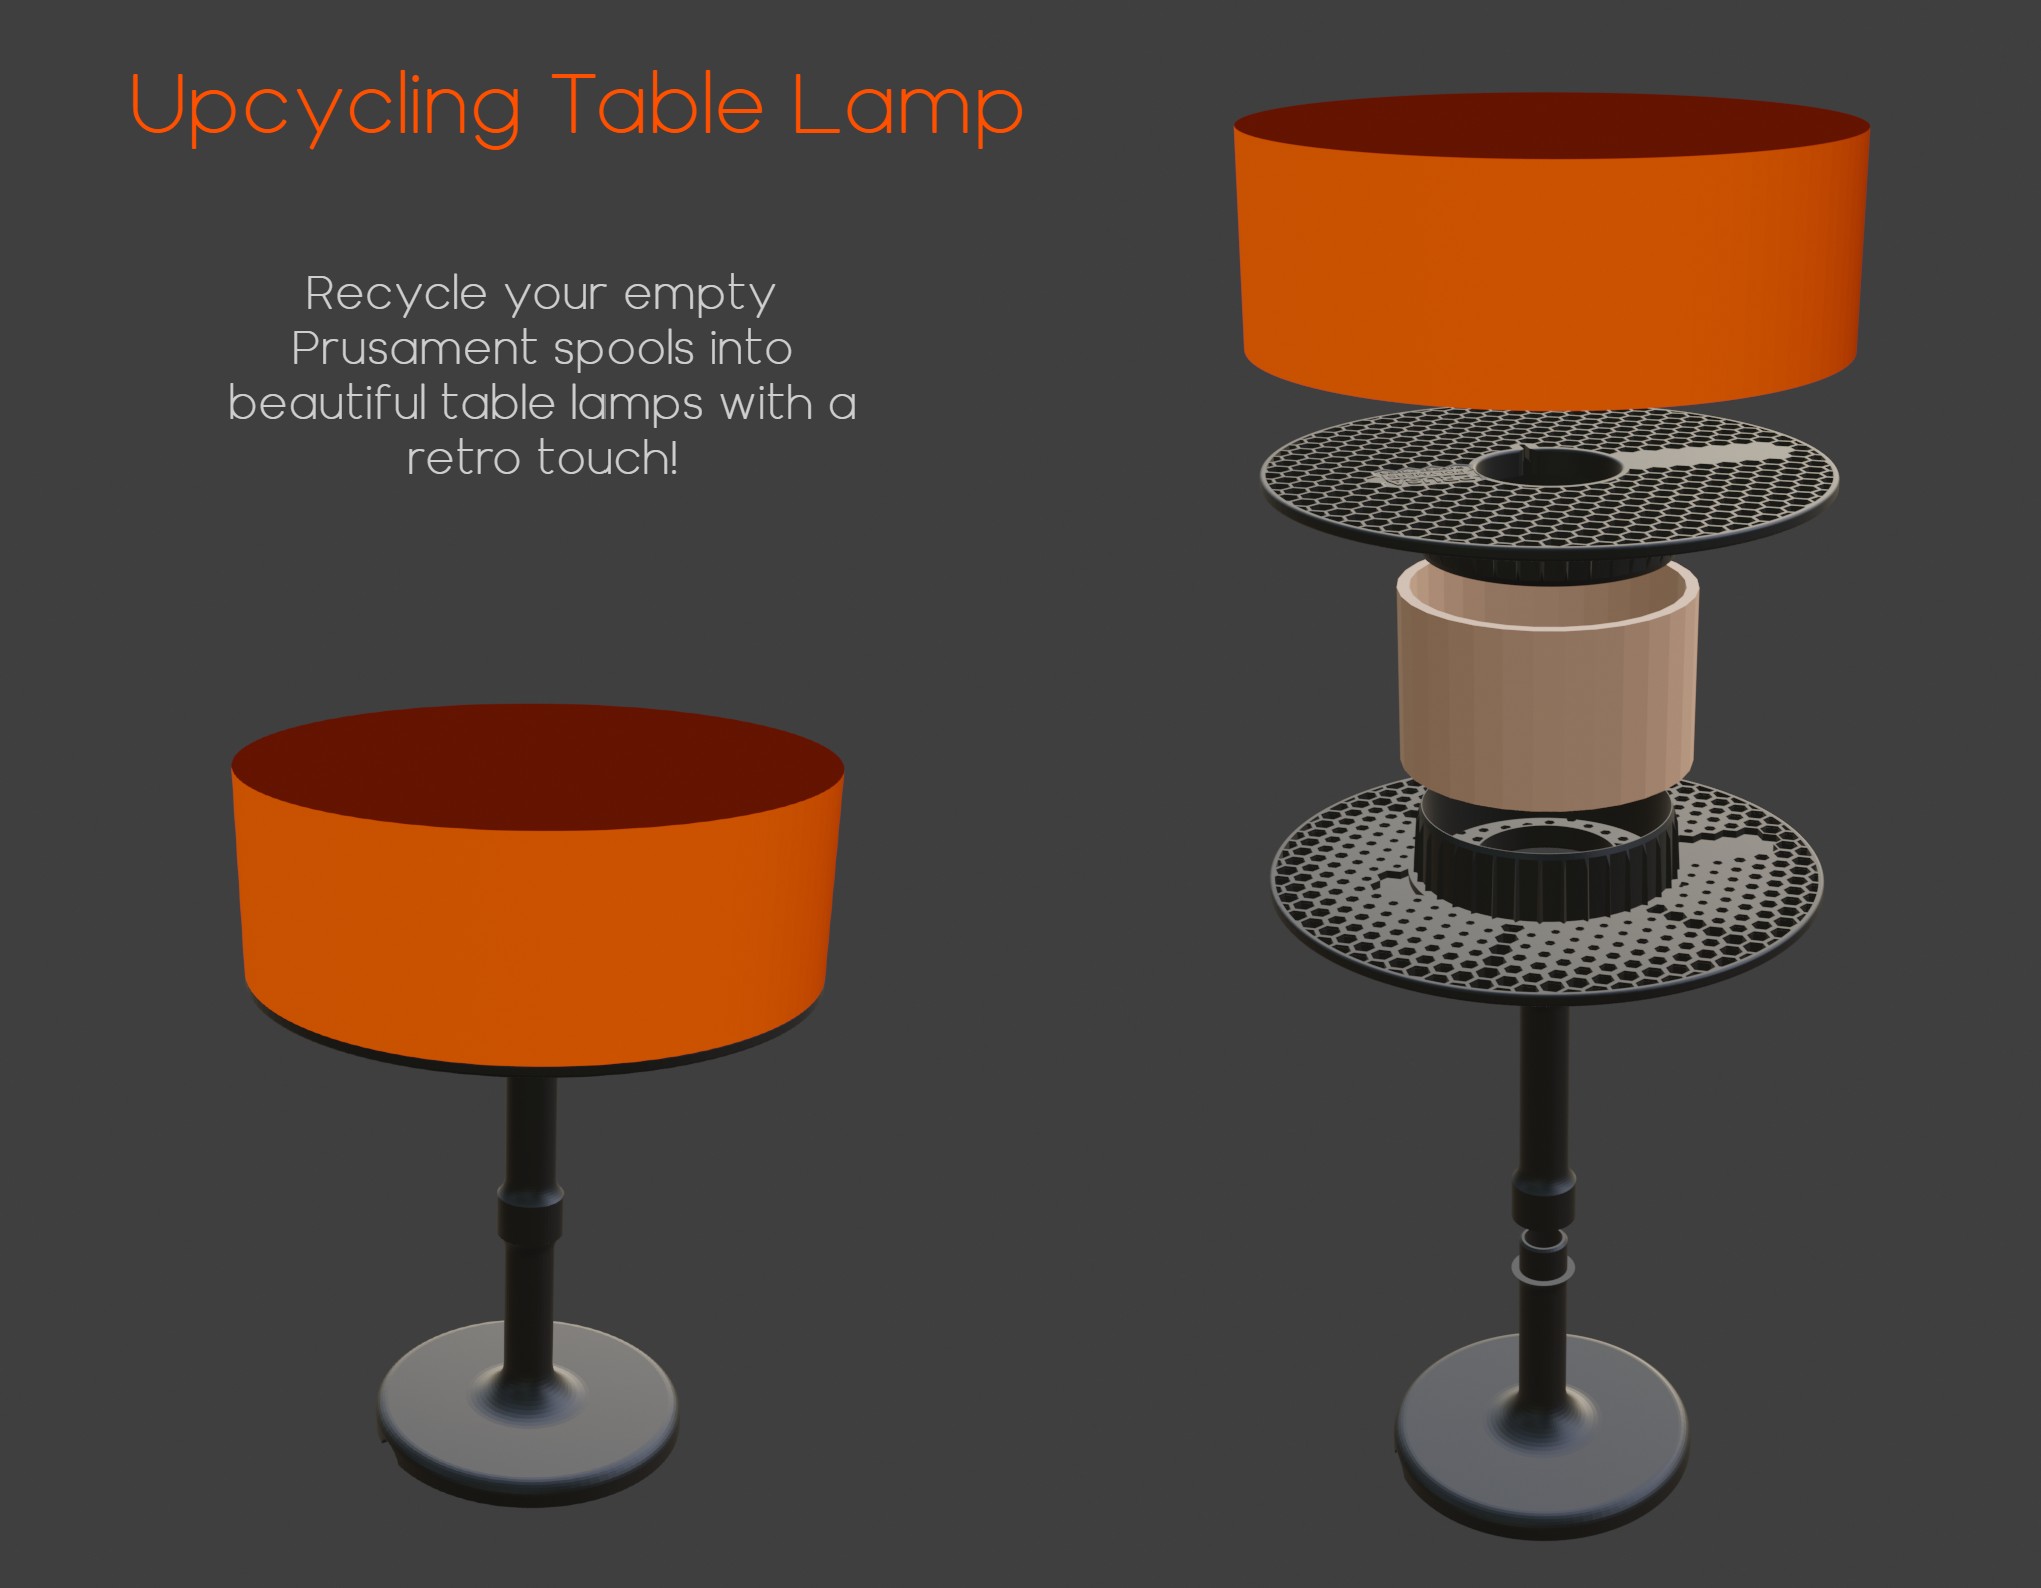 Upcycling Table Lamp